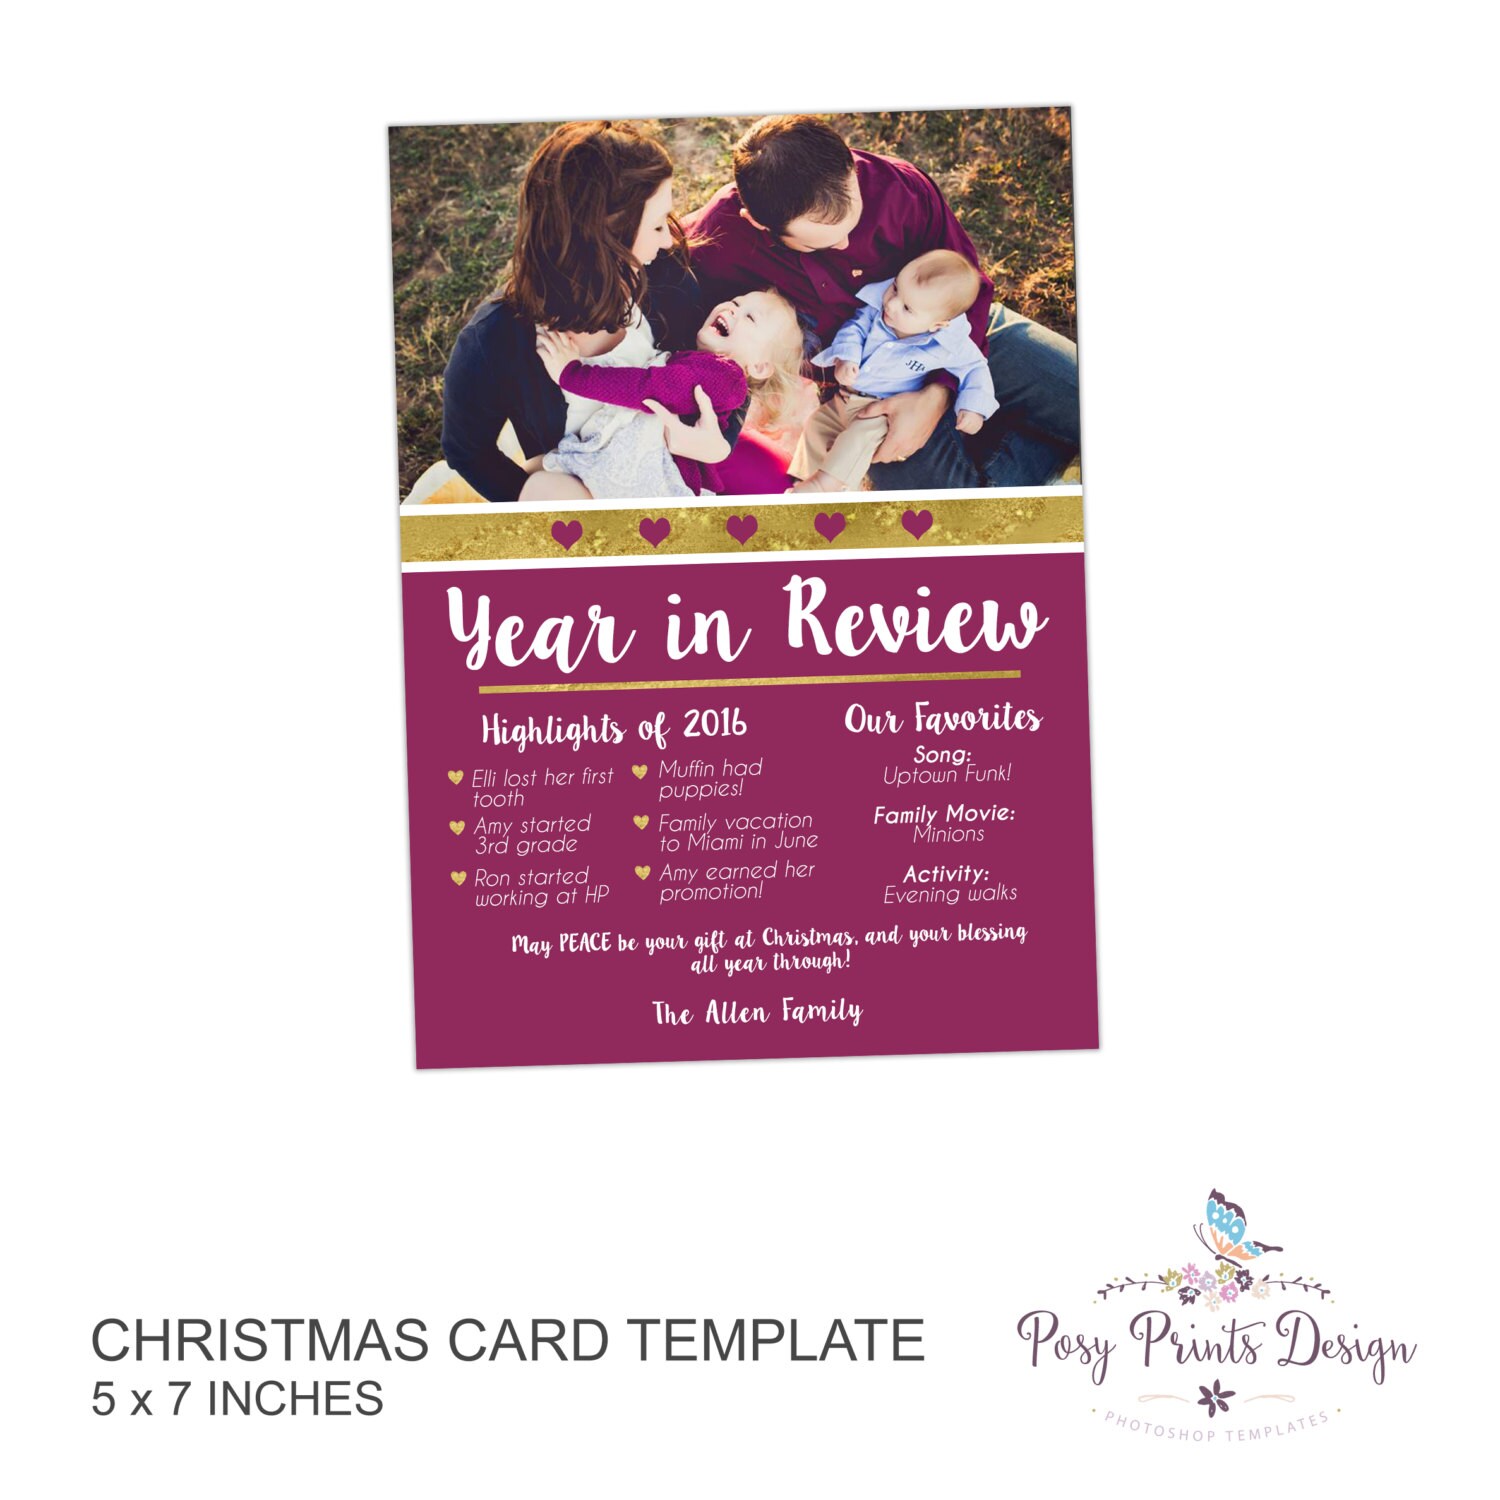 Year In Review Christmas Card Template 5x7 Photo Card